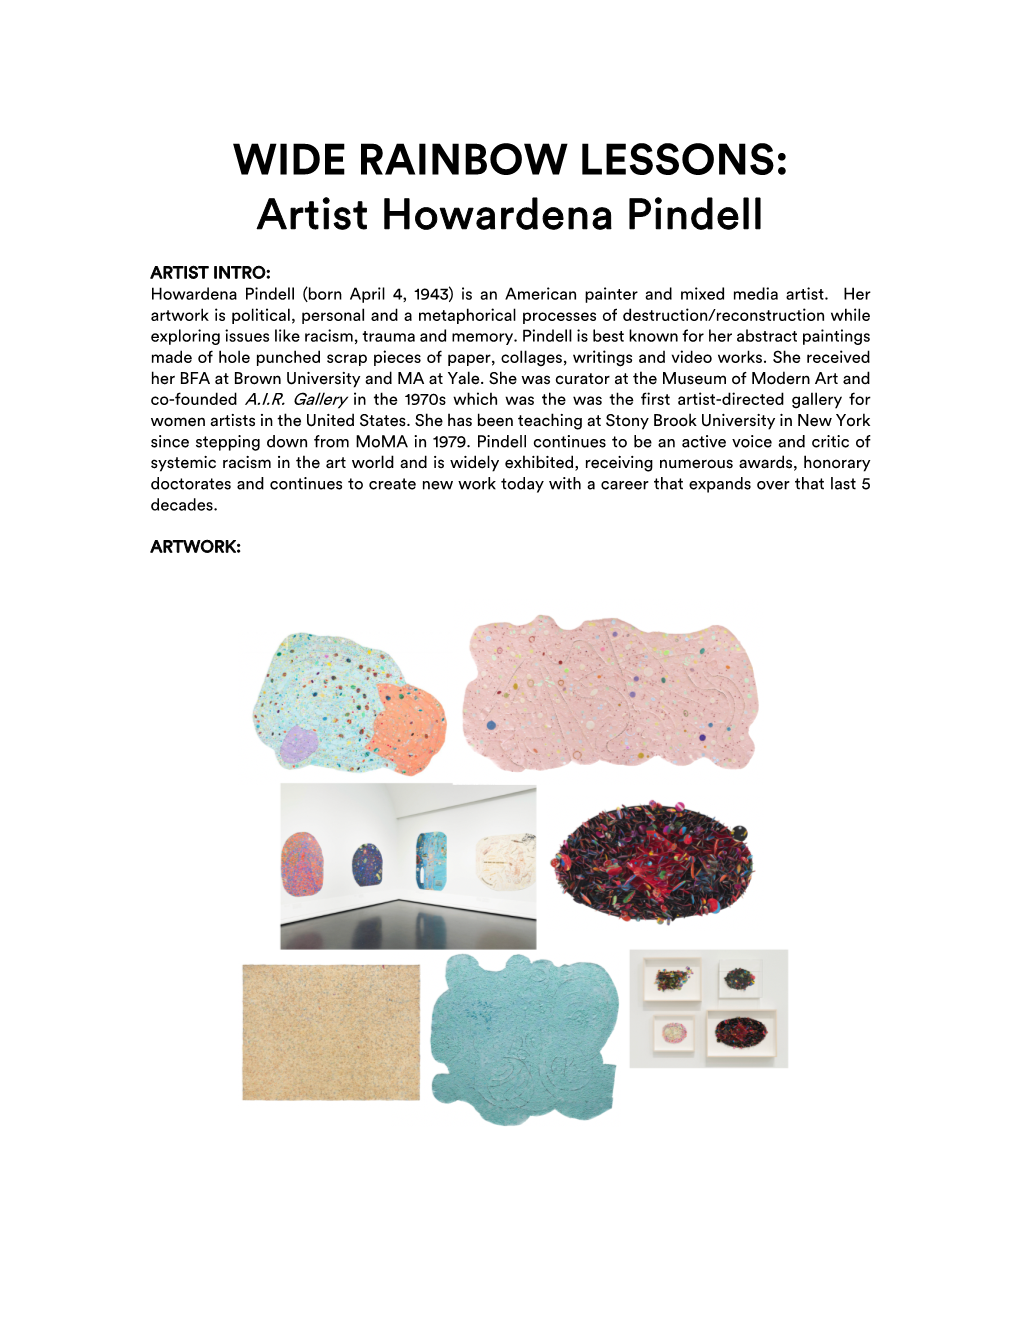 WIDE RAINBOW LESSONS: Artist Howardena Pindell